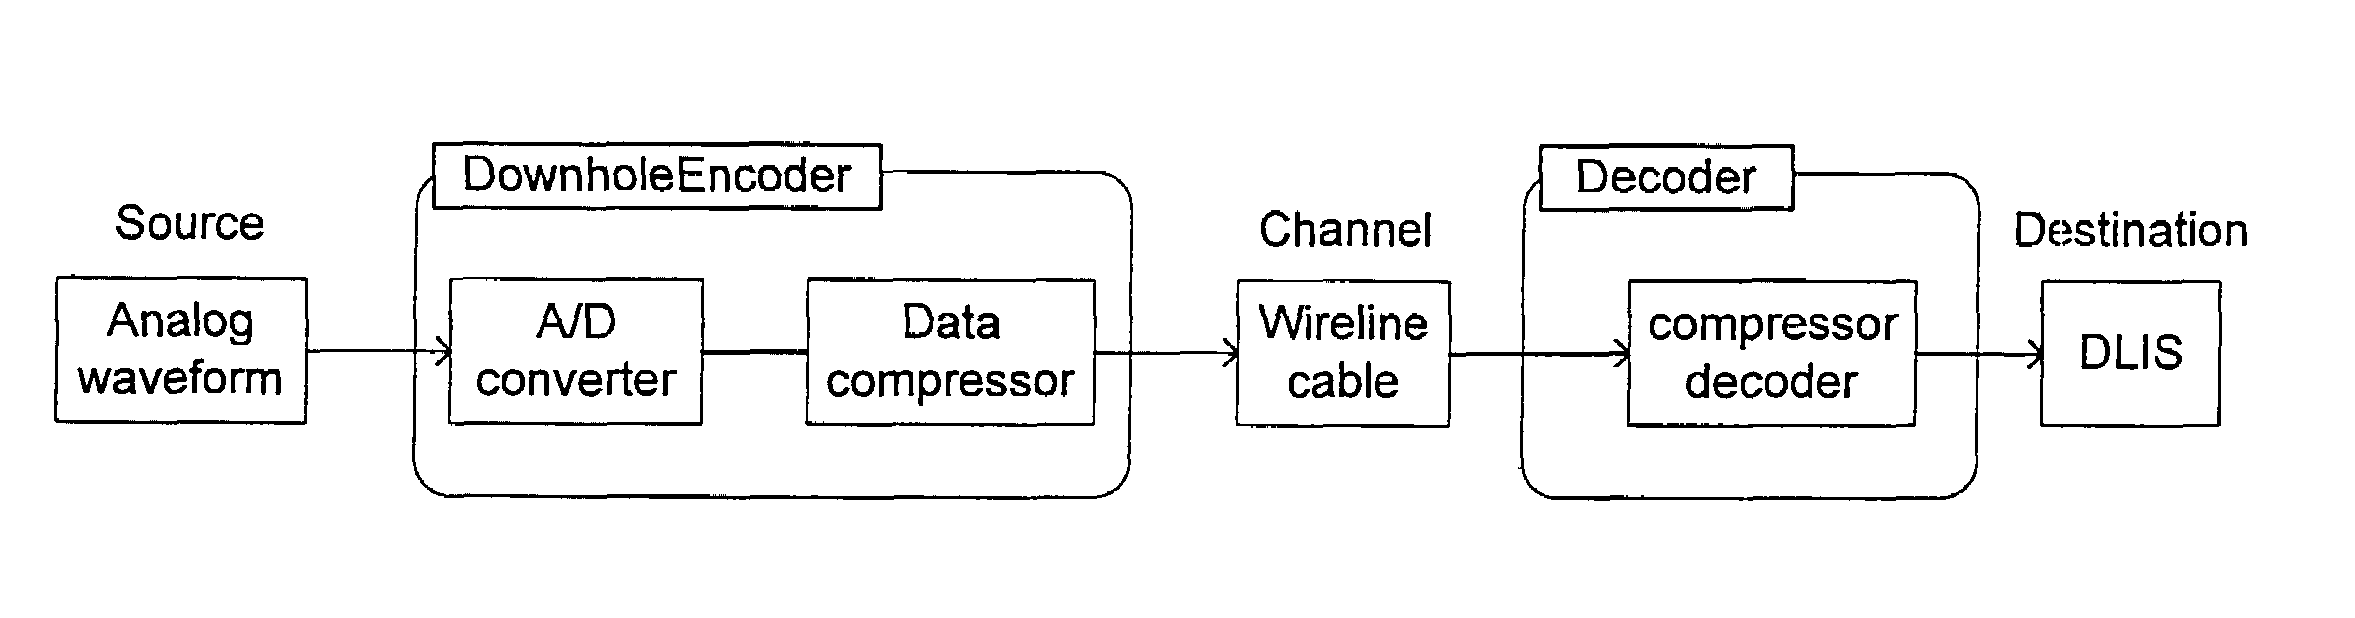 Data compression methods and systems